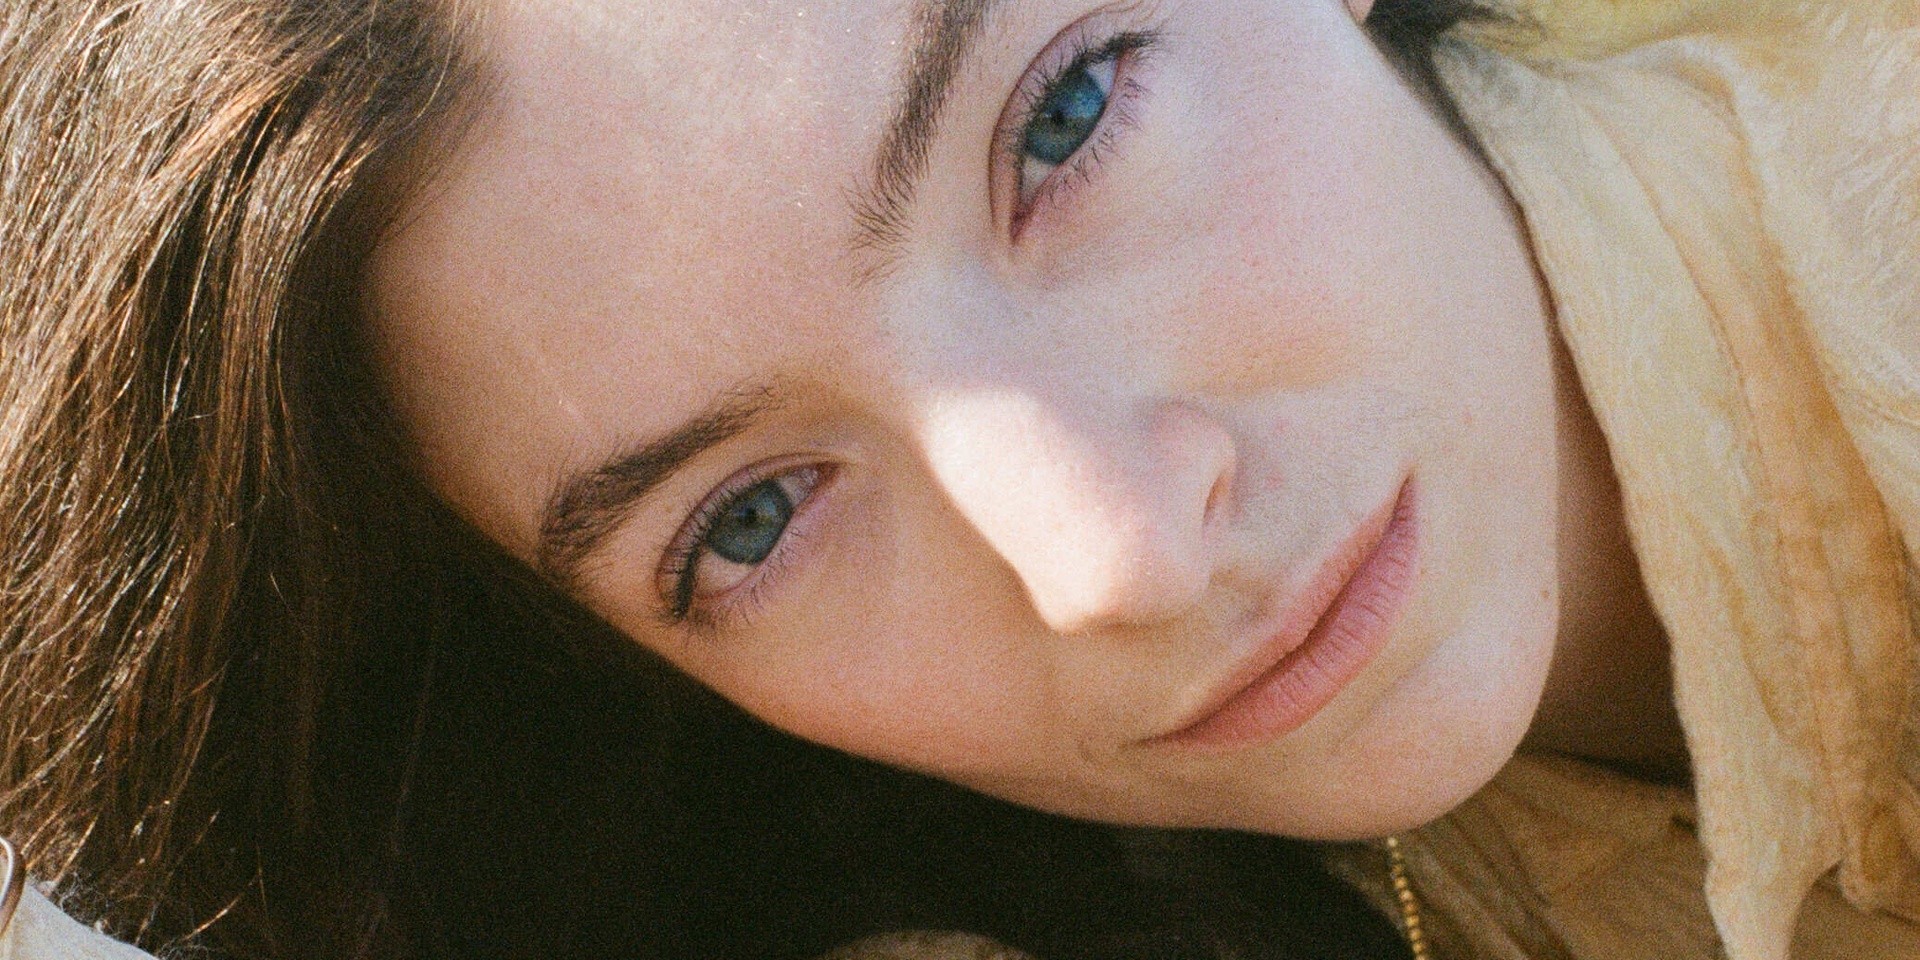 Lorde talks leaving the Internet, channeling the natural world, and creating her 'Solar Power' album with photocards, posters, and more